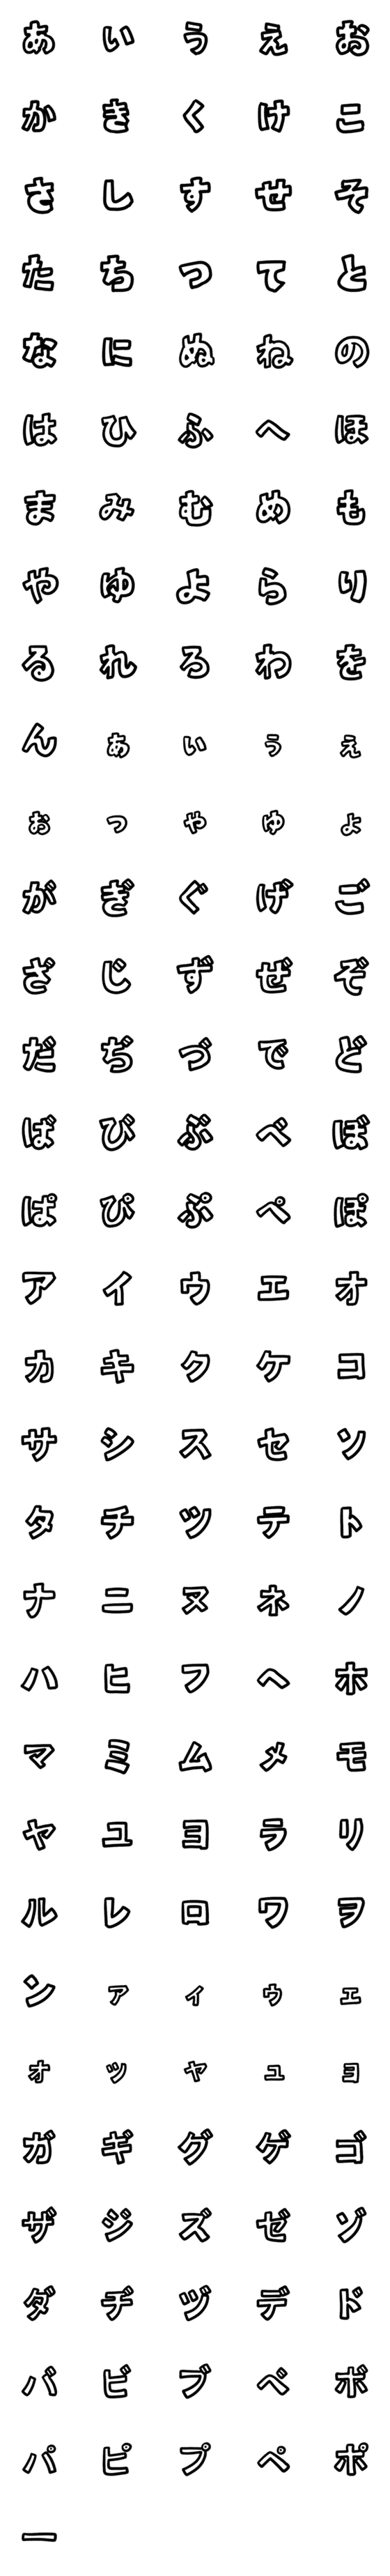 [LINE絵文字]マンガフォントの画像一覧